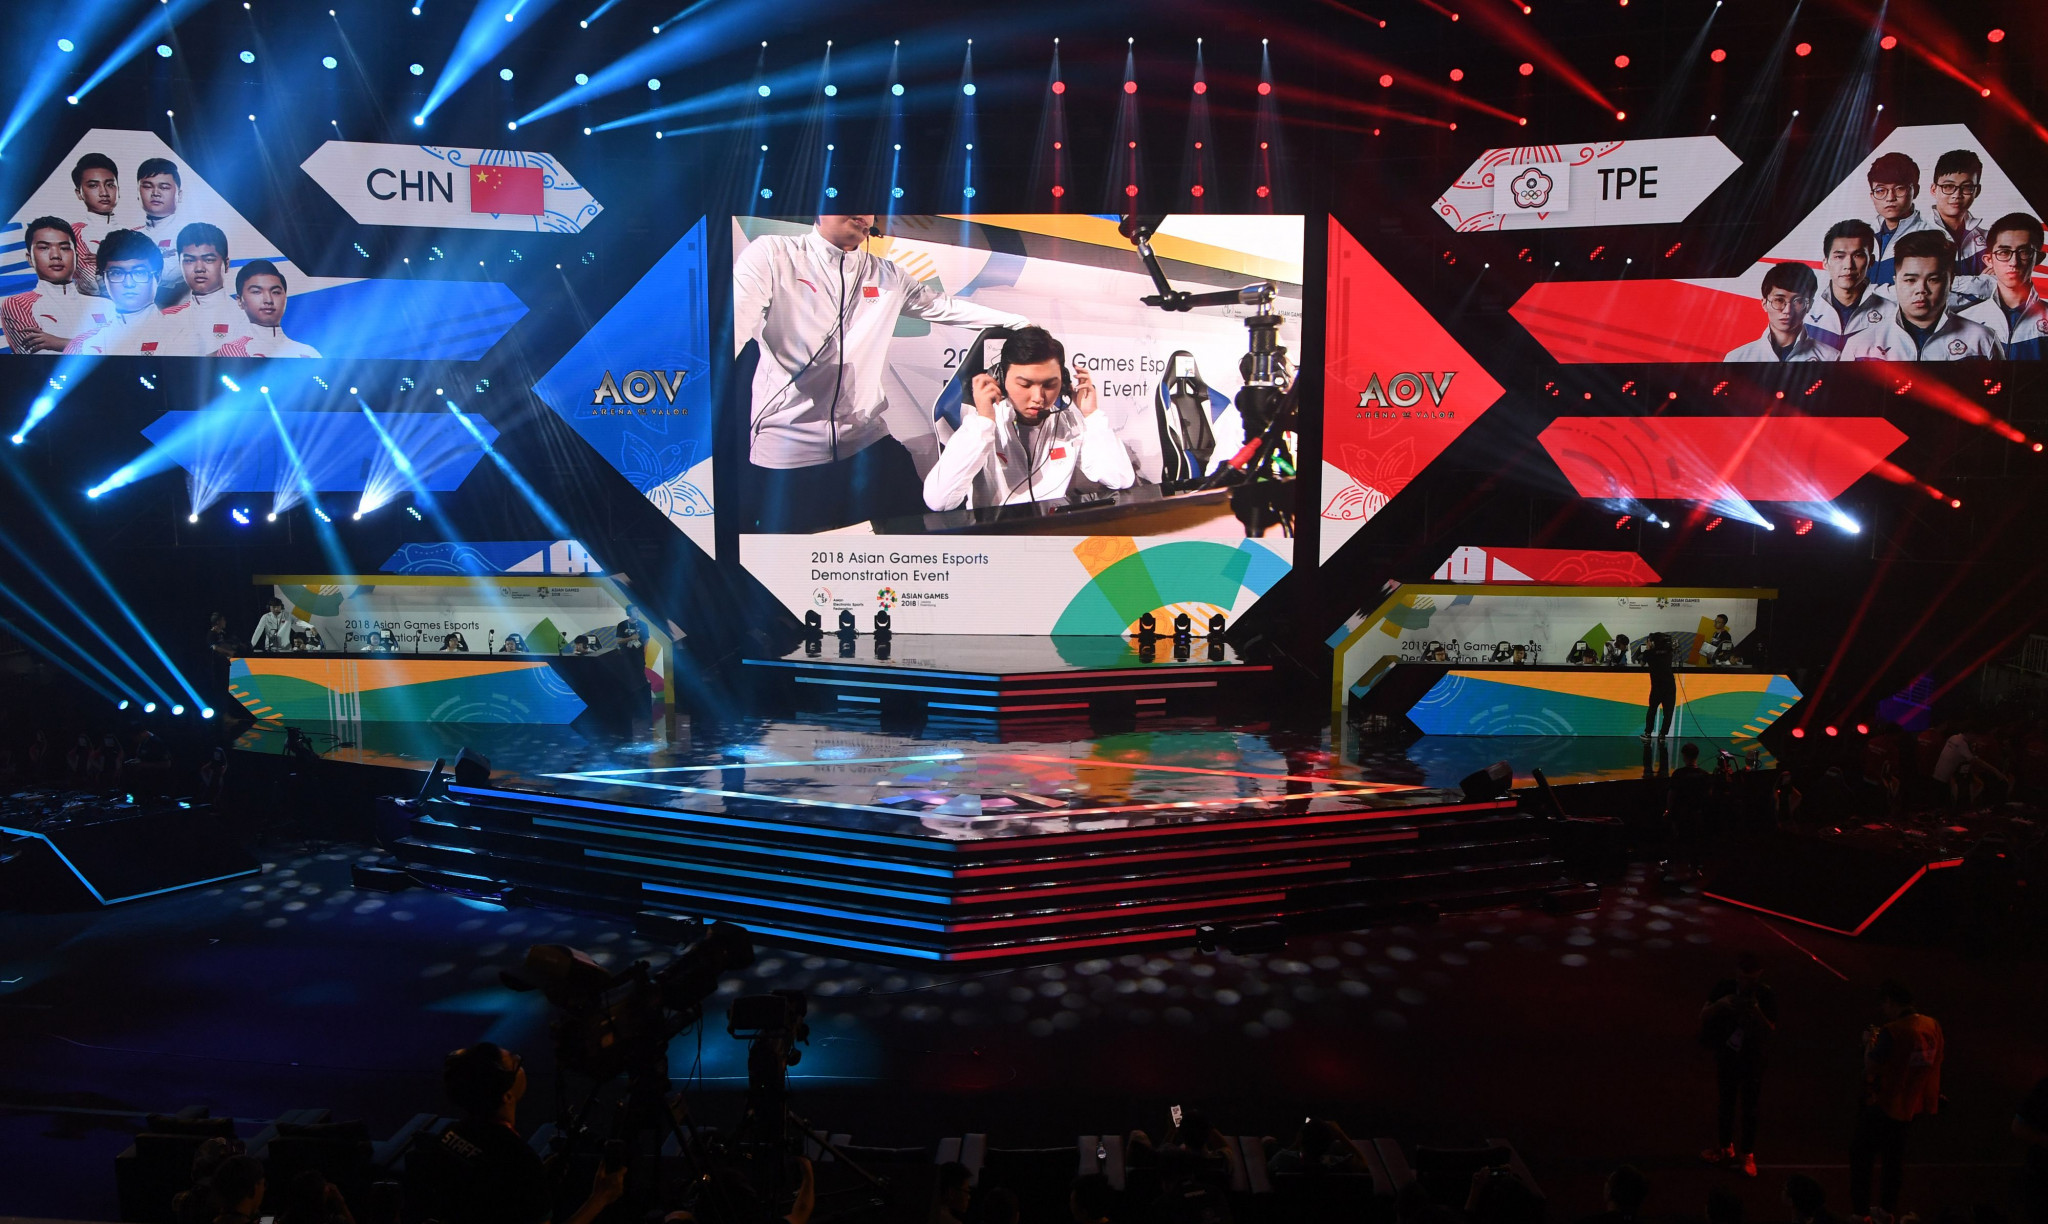 Arena of Valor was among the six titles used when esports featured as a demonstration event at the 2018 Asian Games in Jakarta and Palembang ©Getty Images